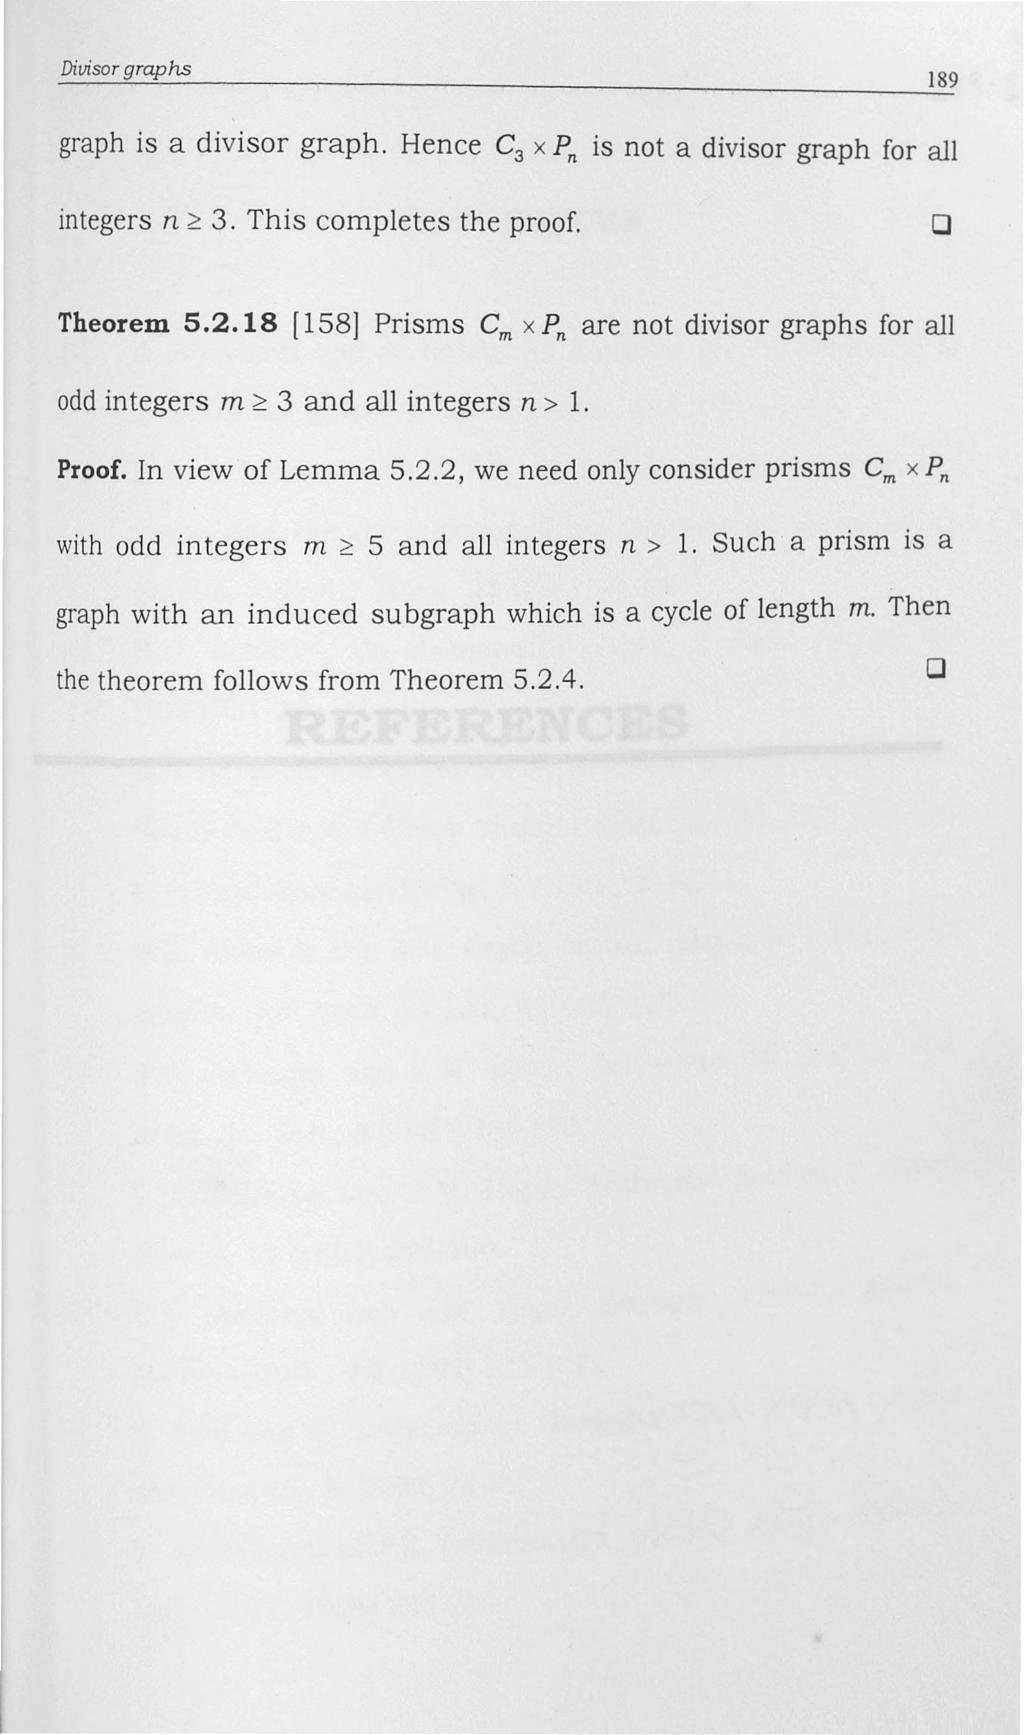 Dillisor graphs graph is a divisor graph. Hence C 3 X P n 189 is not a divisor graph for all integers n ~ 3. This completes the proof. o Theorem 5.2.